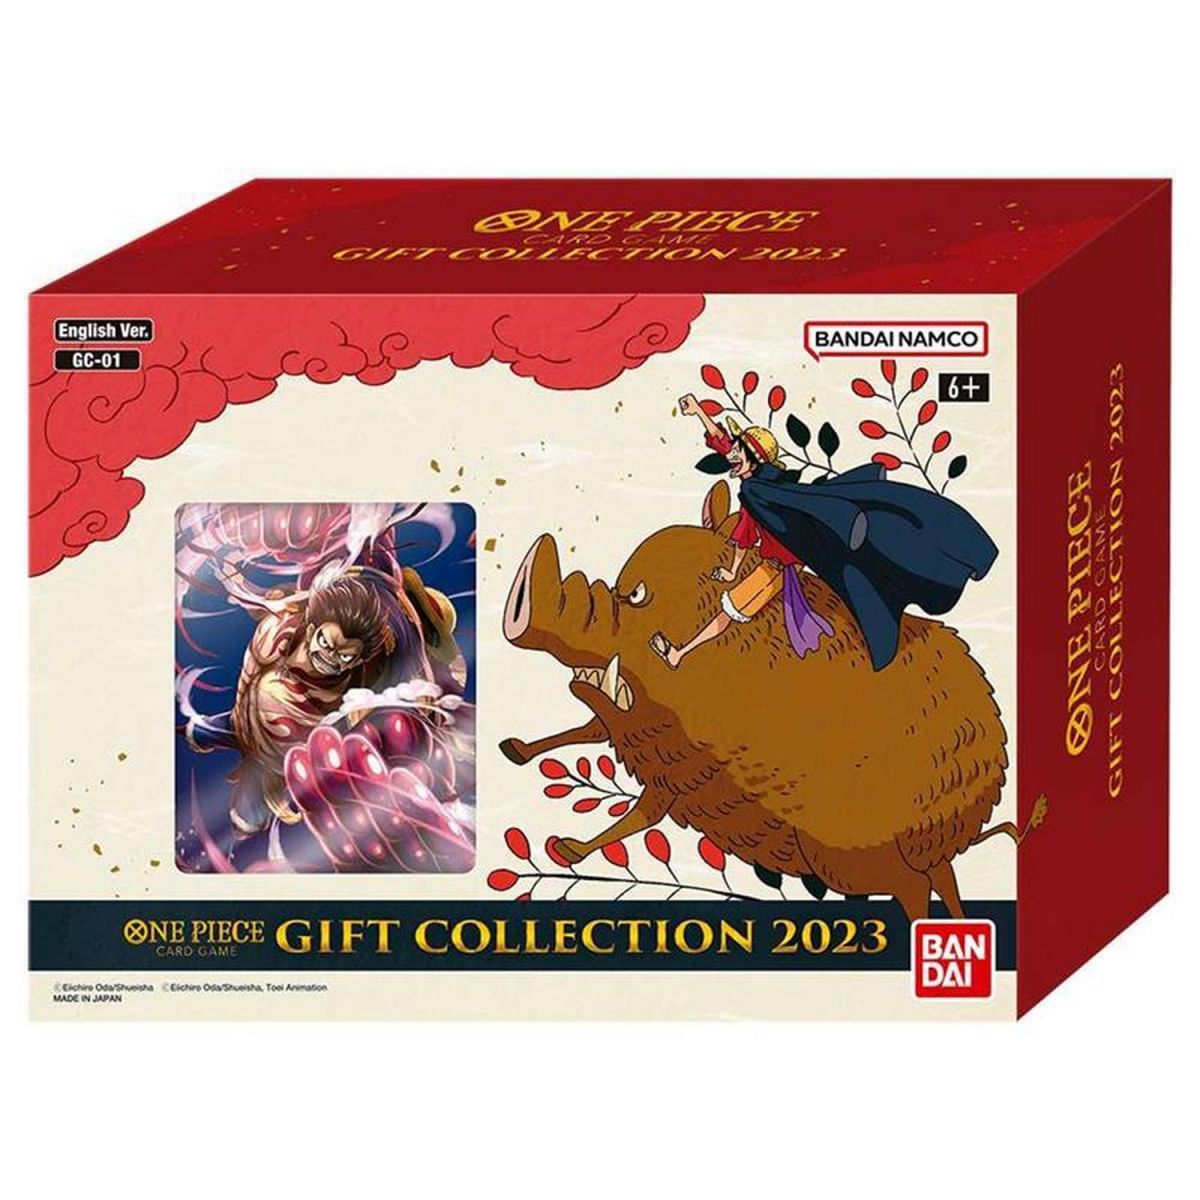 One Piece CG - Box Set - Gift Collection 2023 - Kingdoms of Intrigue OP-04 - EN